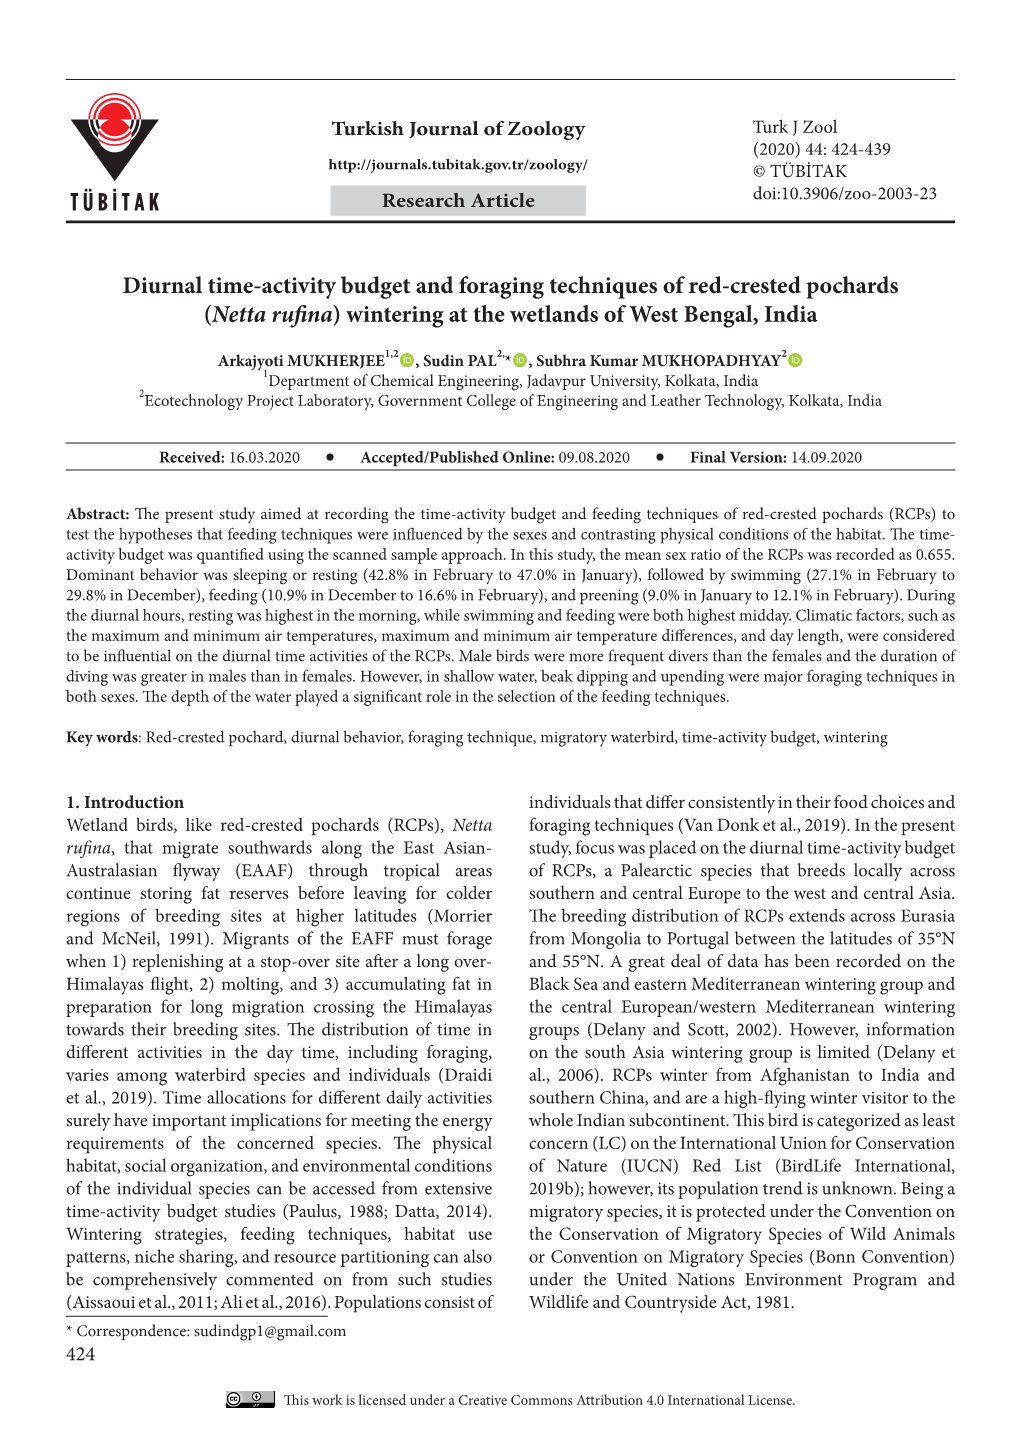 Diurnal Time-Activity Budget and Foraging Techniques of Red-Crested Pochards (Netta Rufina) Wintering at the Wetlands of West Bengal, India